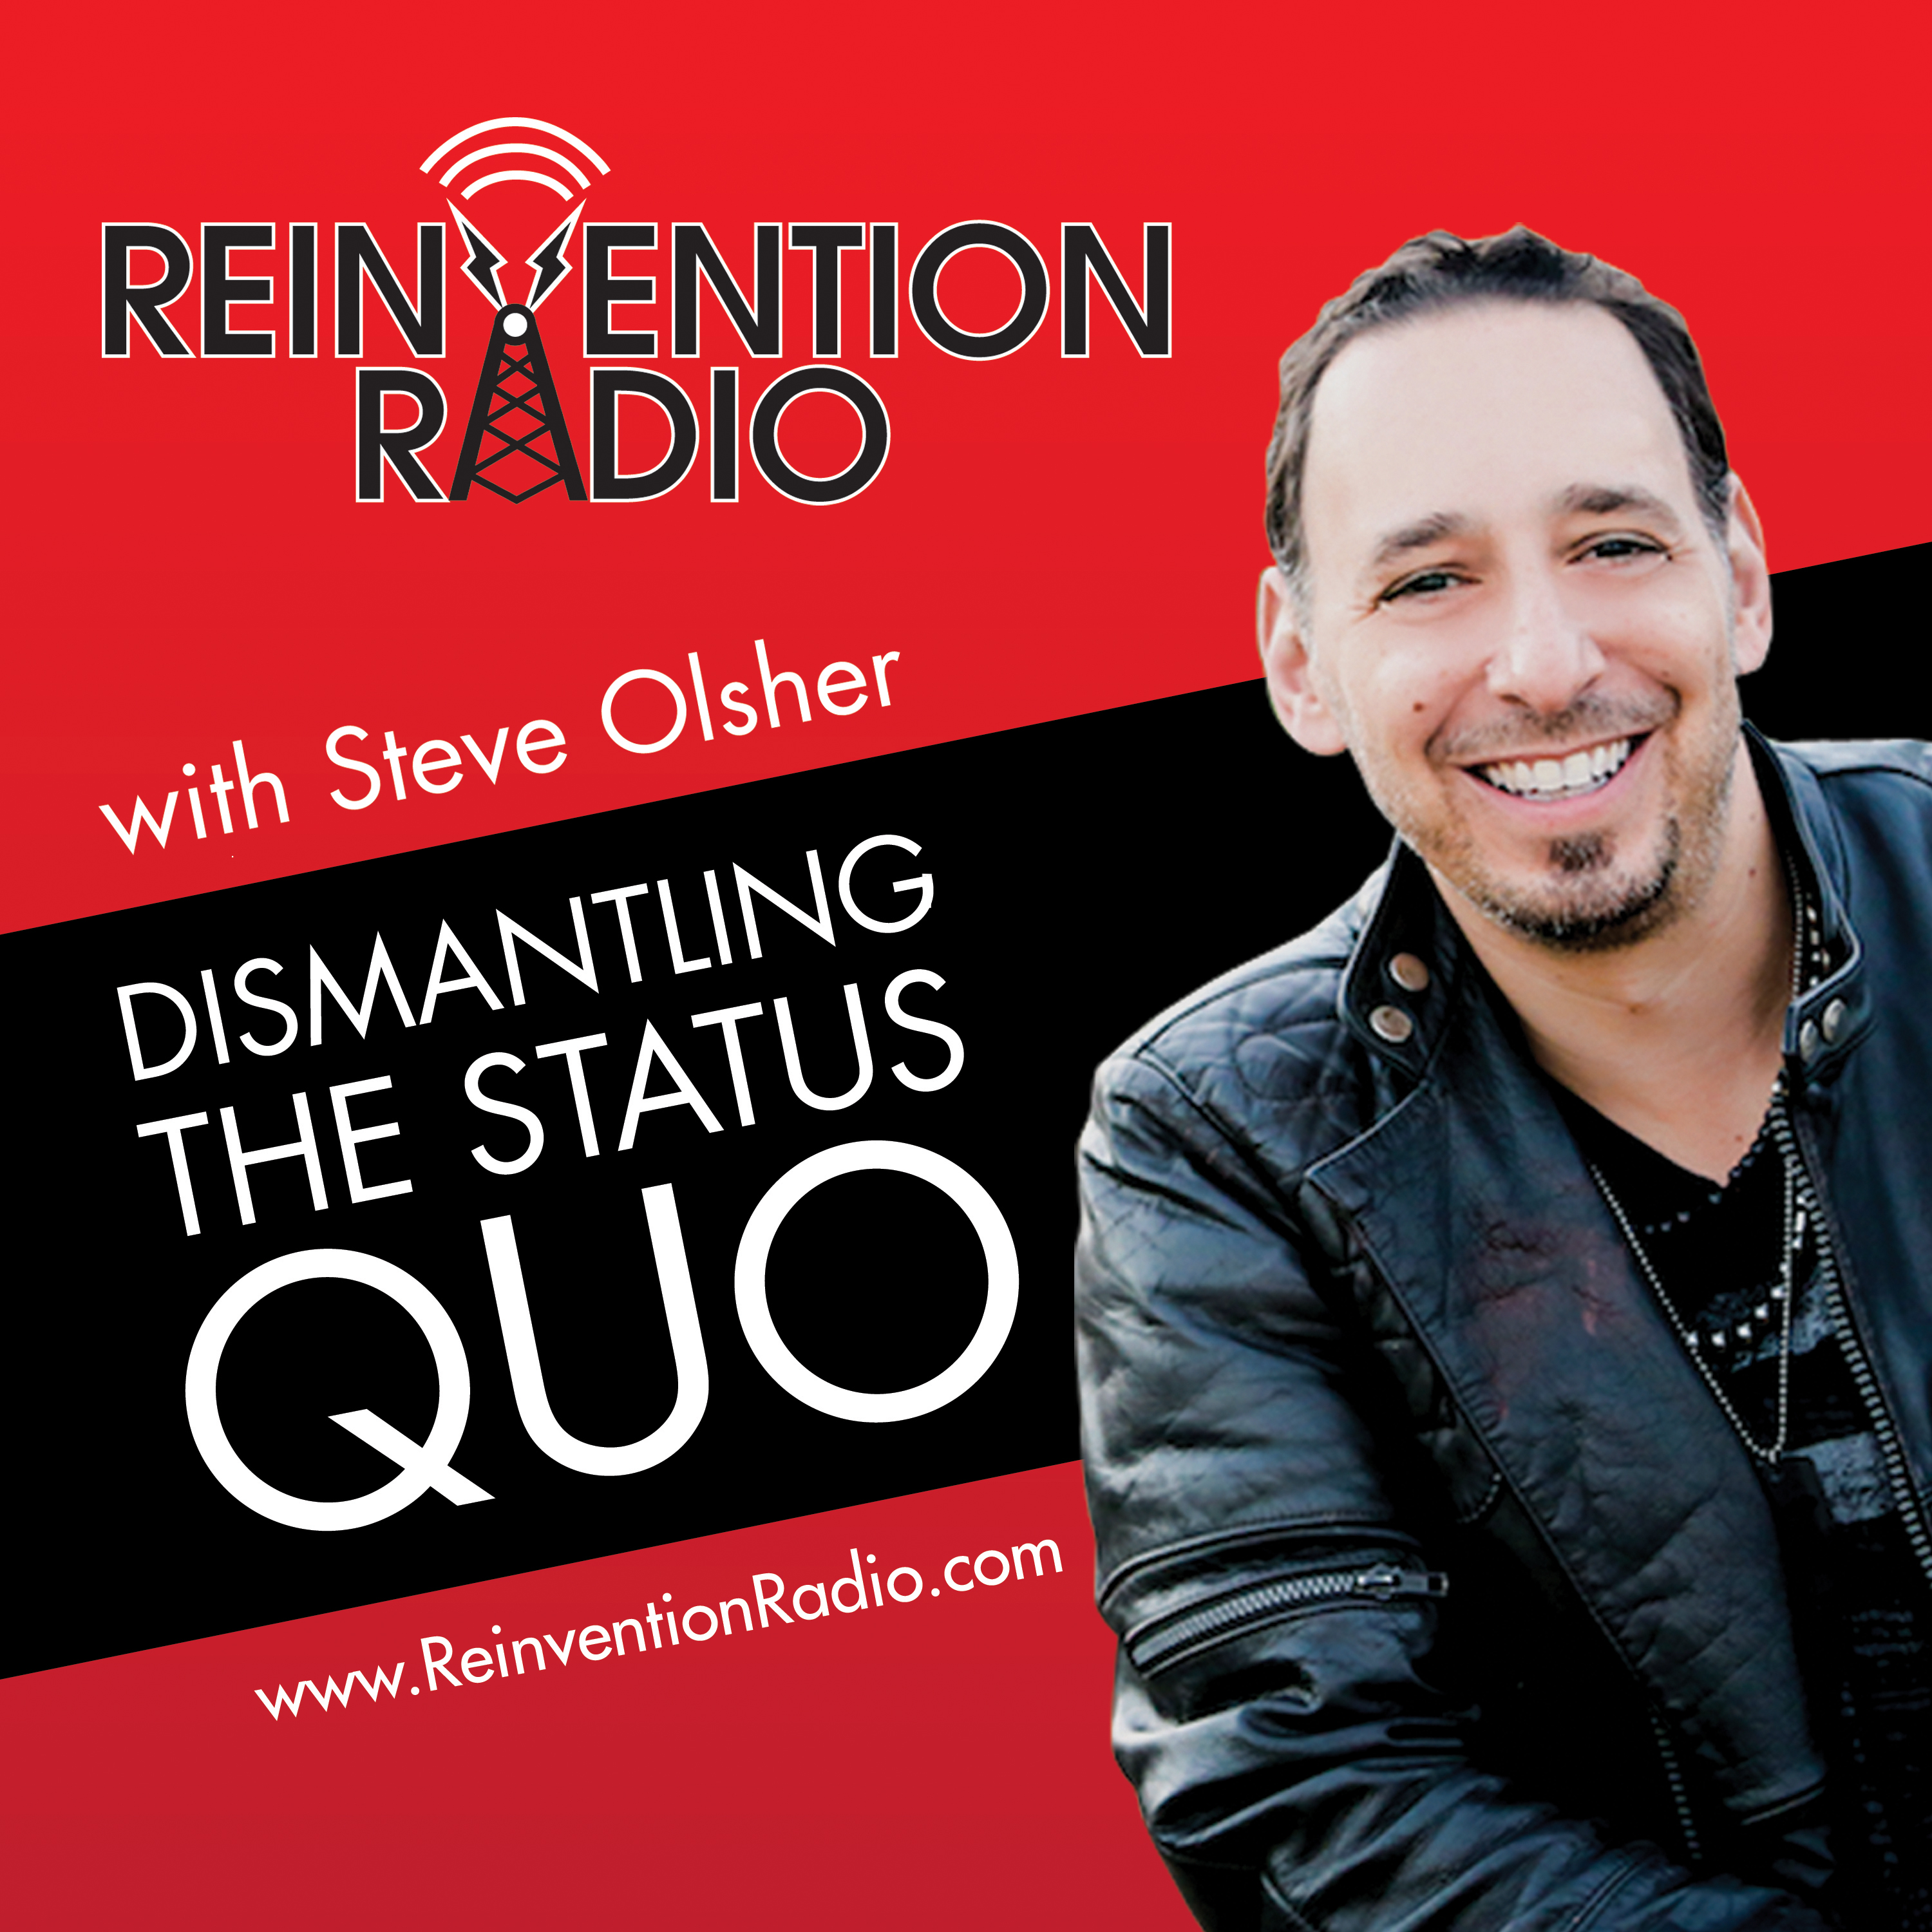 A highlight from REINVENTION RADIO CLASSICS #2  SIT DOWN WITH JOHN LEE DUMAS